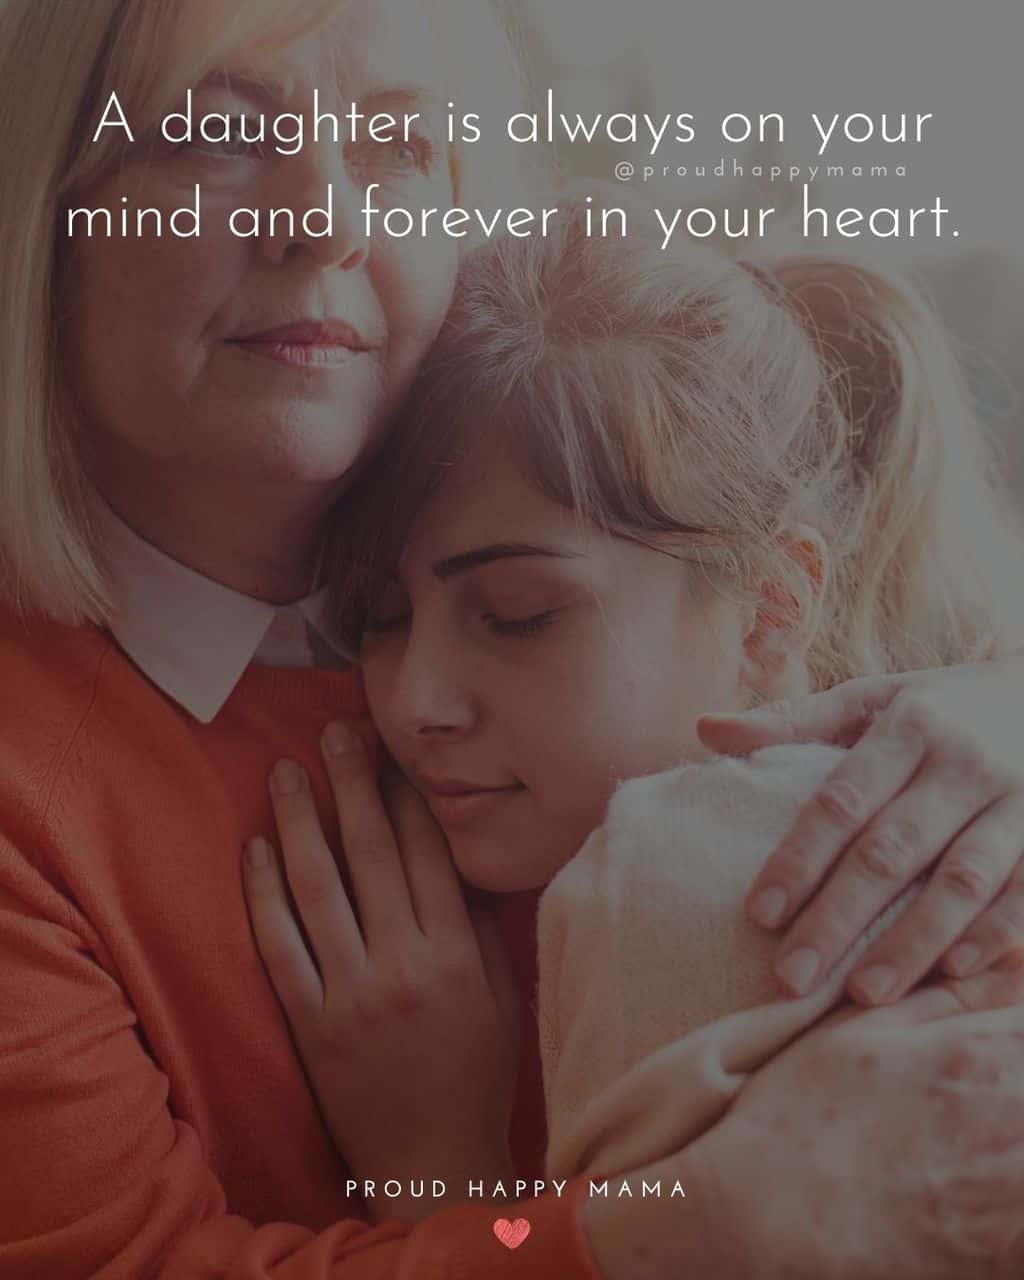 my life my daughter quotes - ‘A daughter is always on your mind and forever in your heart.’